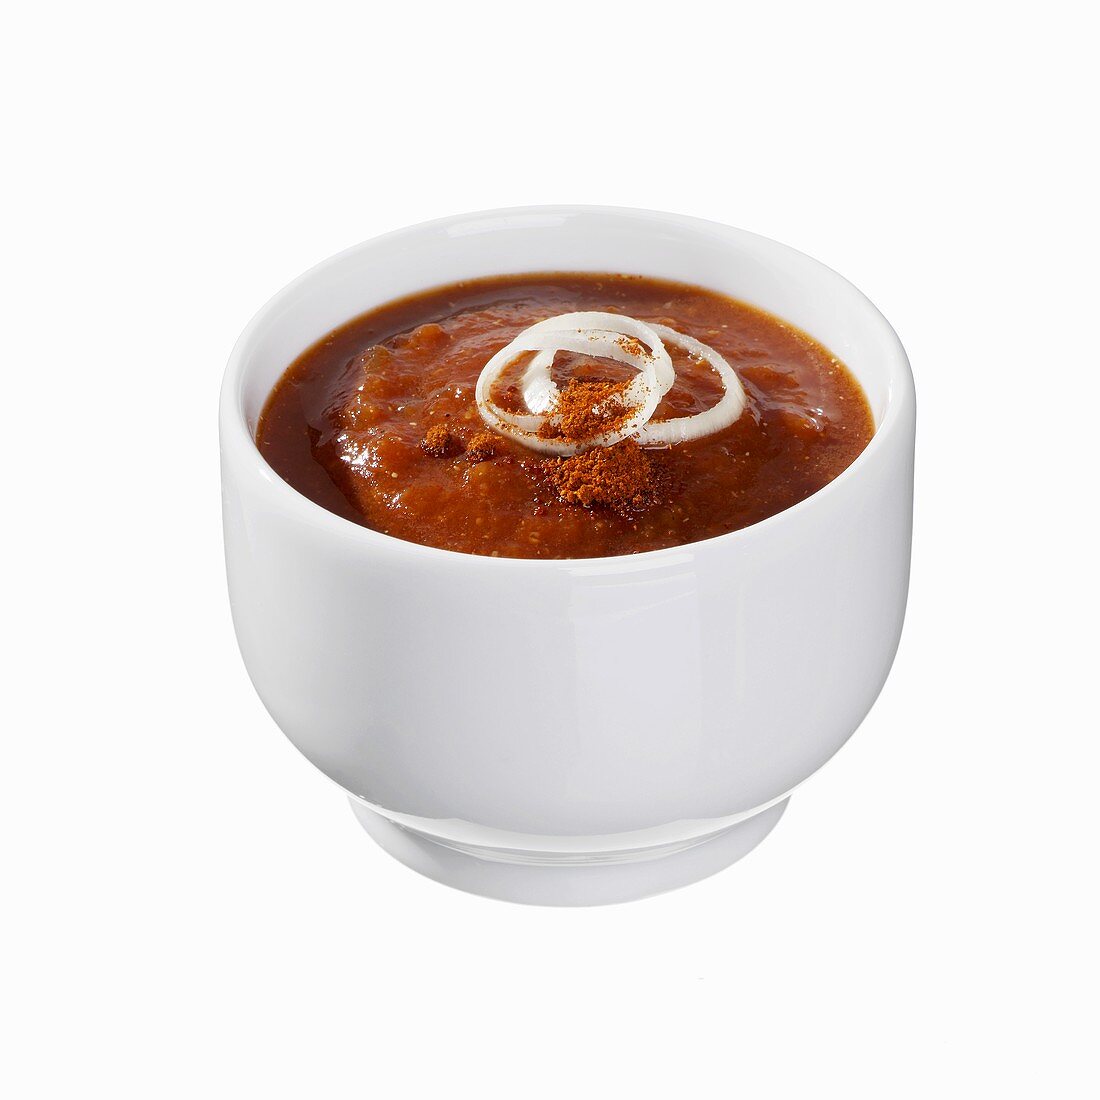 Barbecue sauce in a small bowl